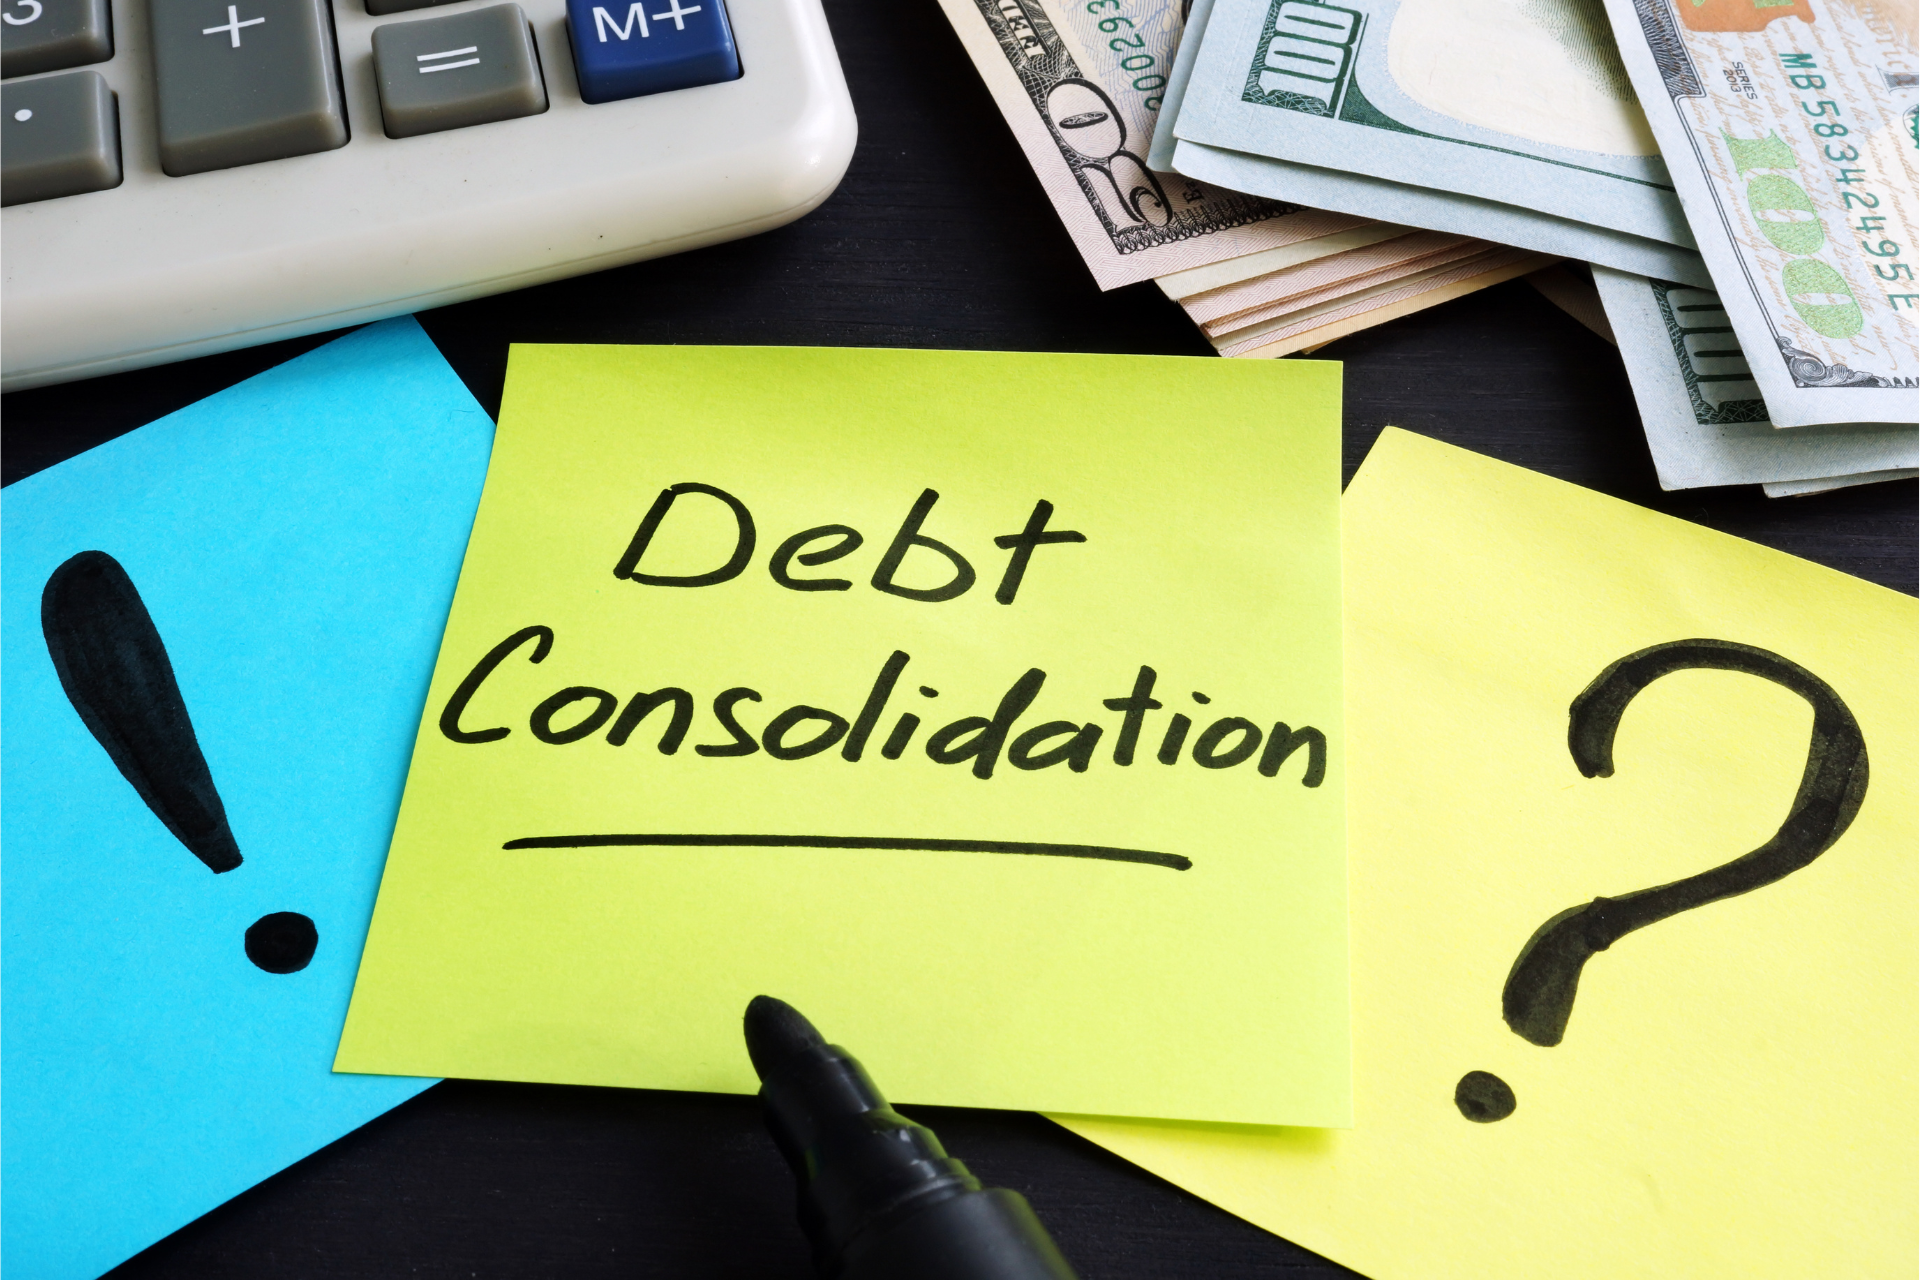 Consolidate Payday Loan Debt using Home Equity